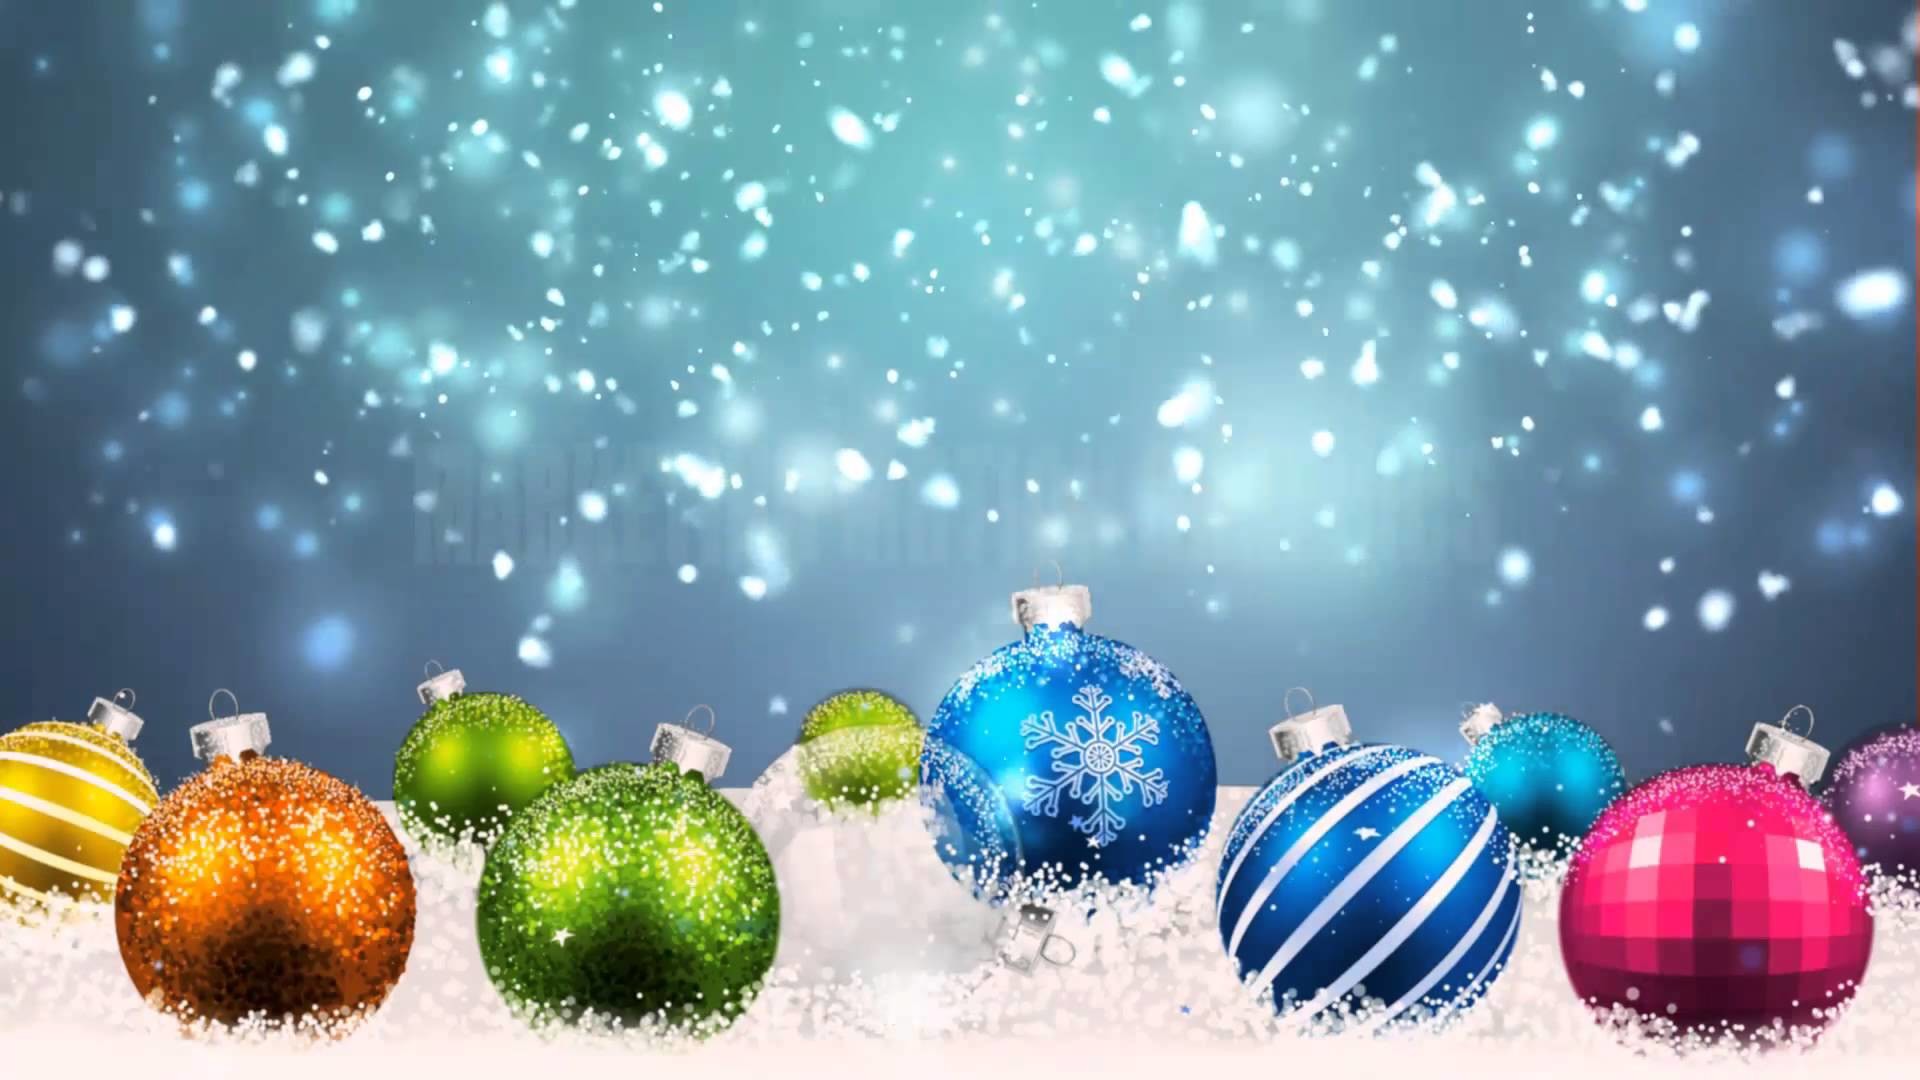 Christmas Backgrounds (59+ images)